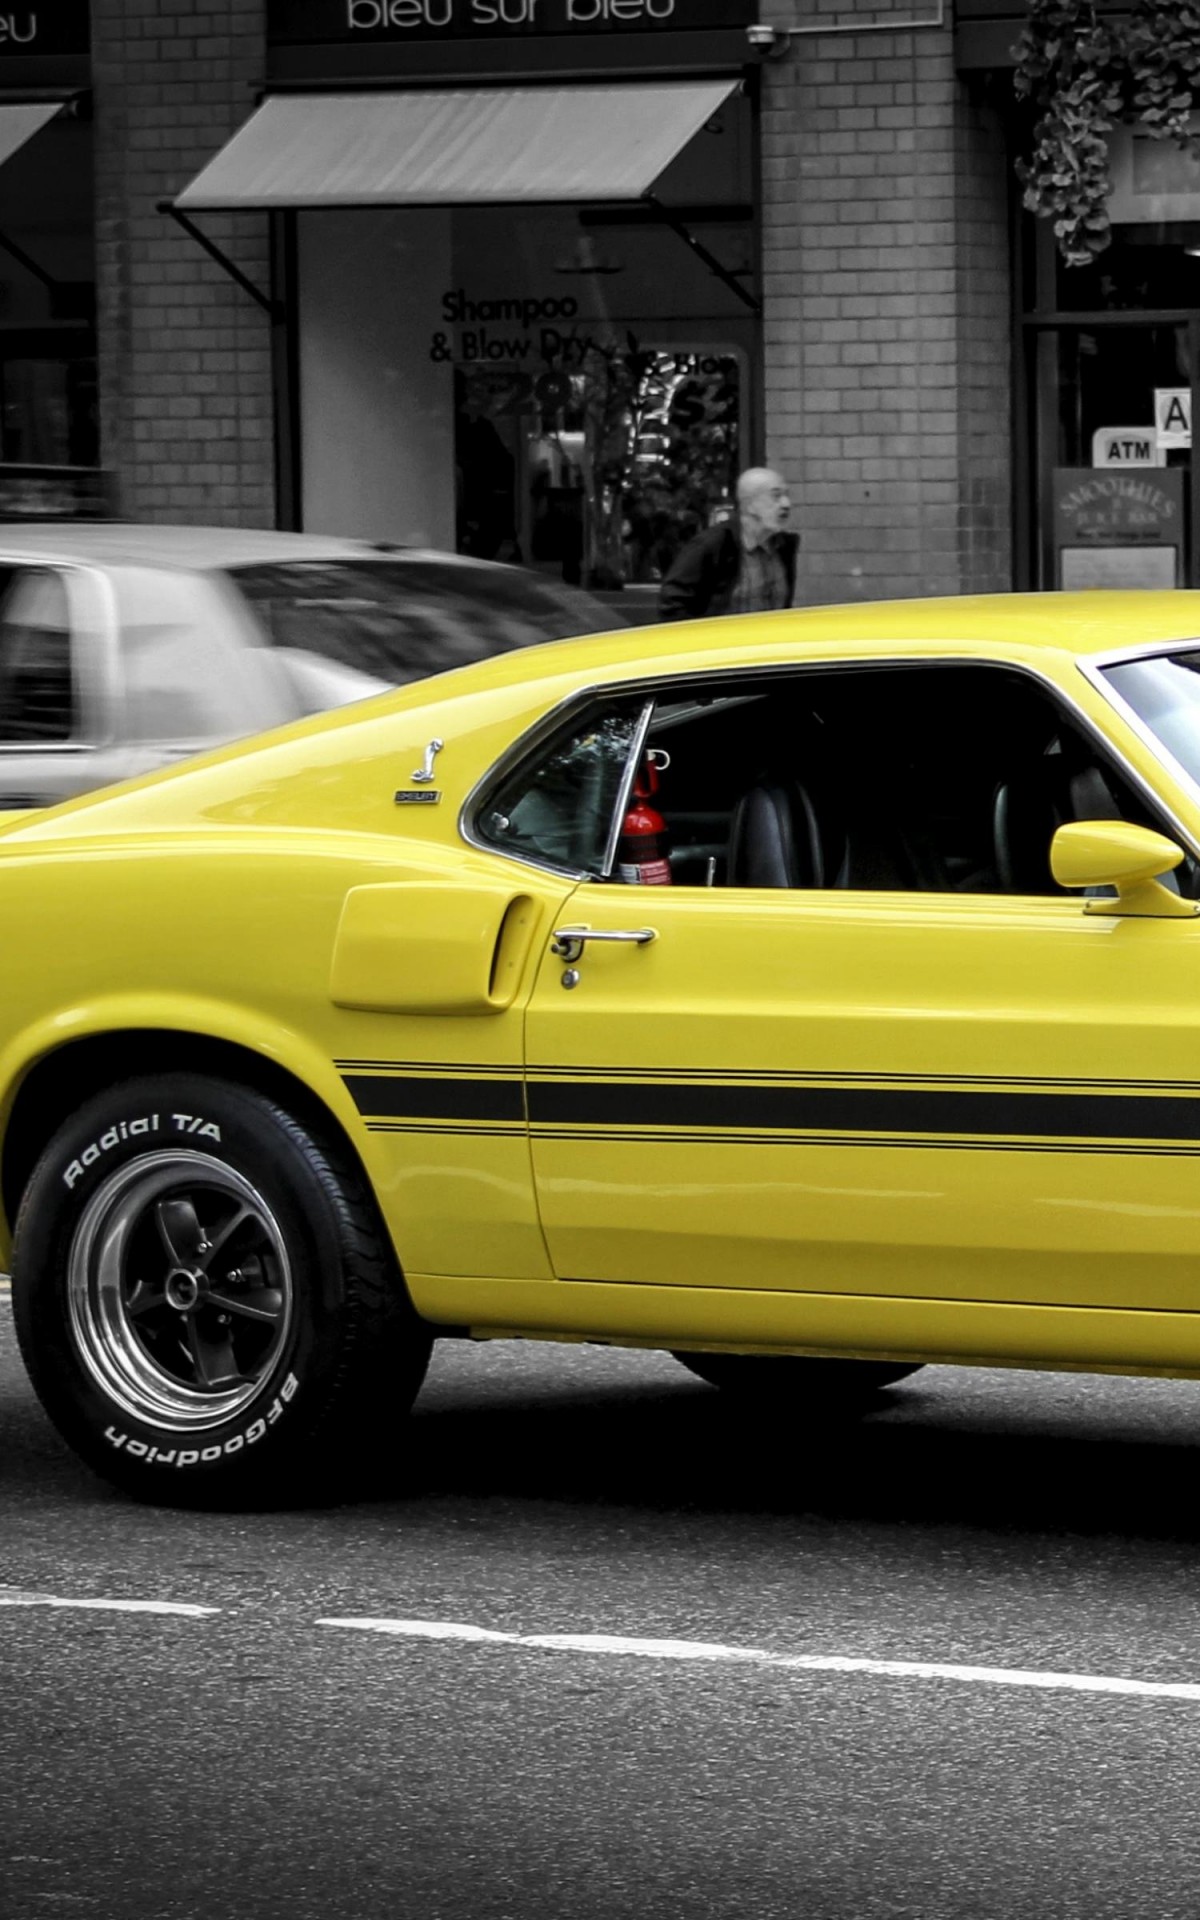 1969 Ford Mustang GT350 Wallpaper for Amazon Kindle Fire HDX